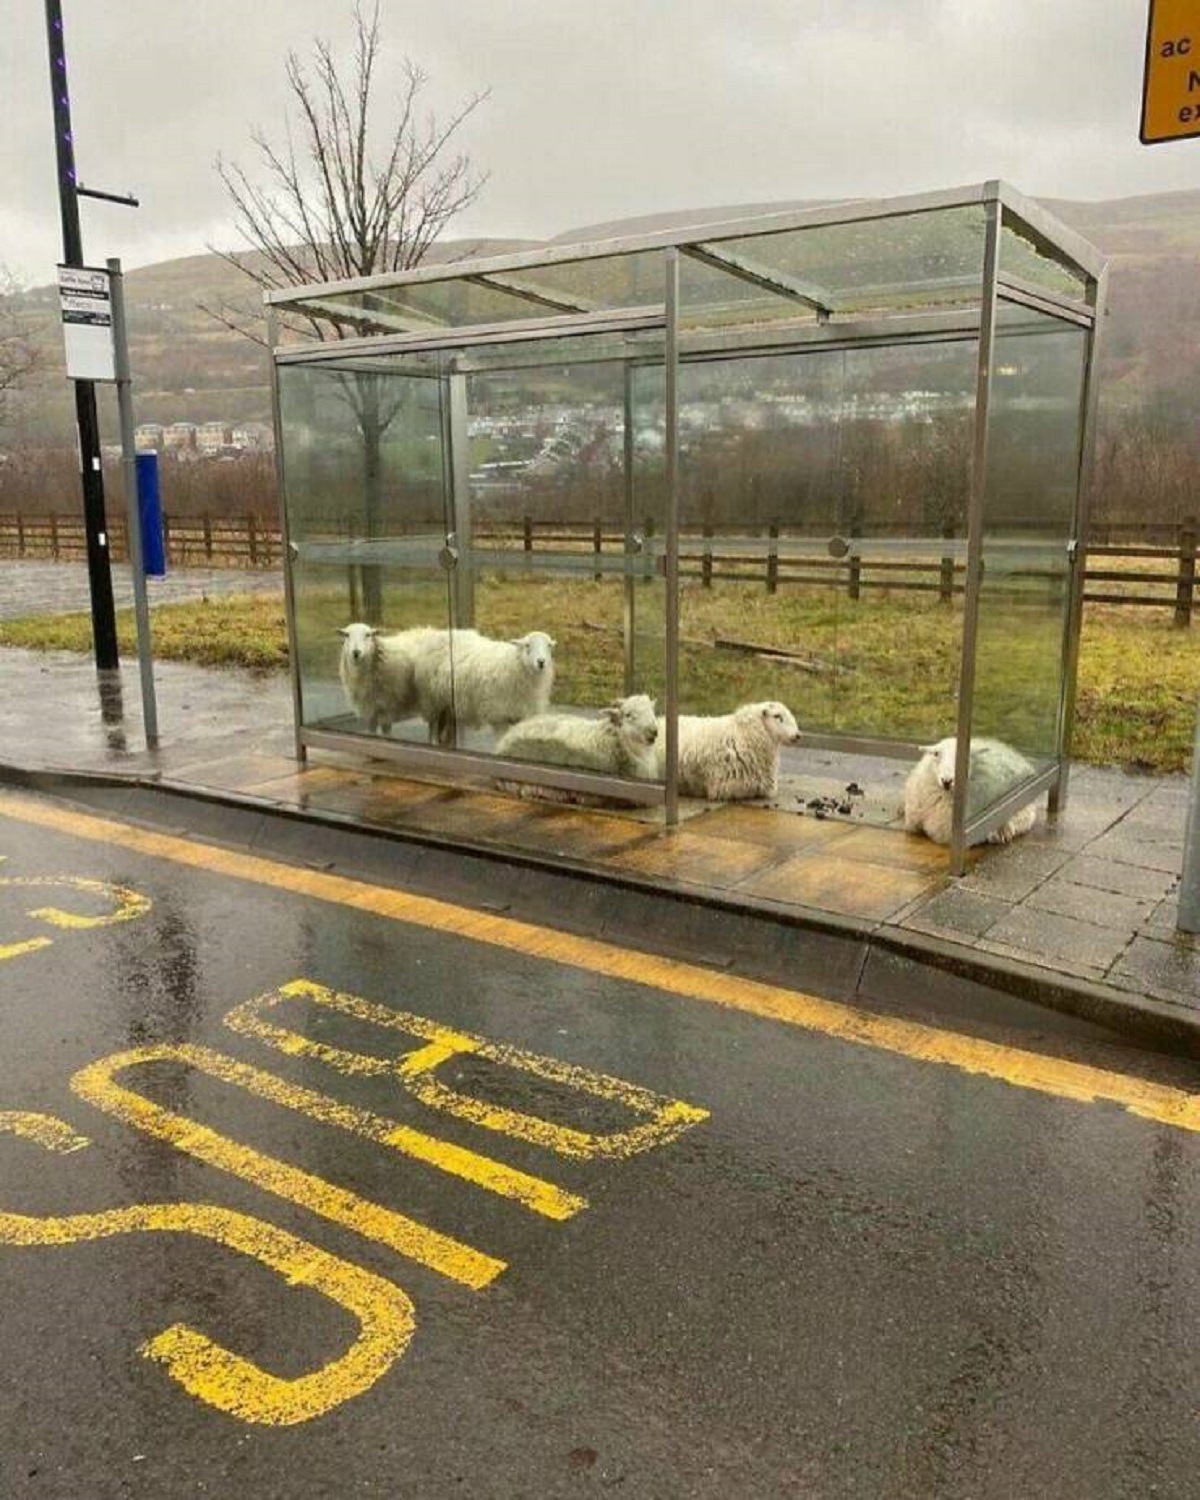 "Sheep Sheltering At A Bus Stop On A Rainy Day In Ireland"